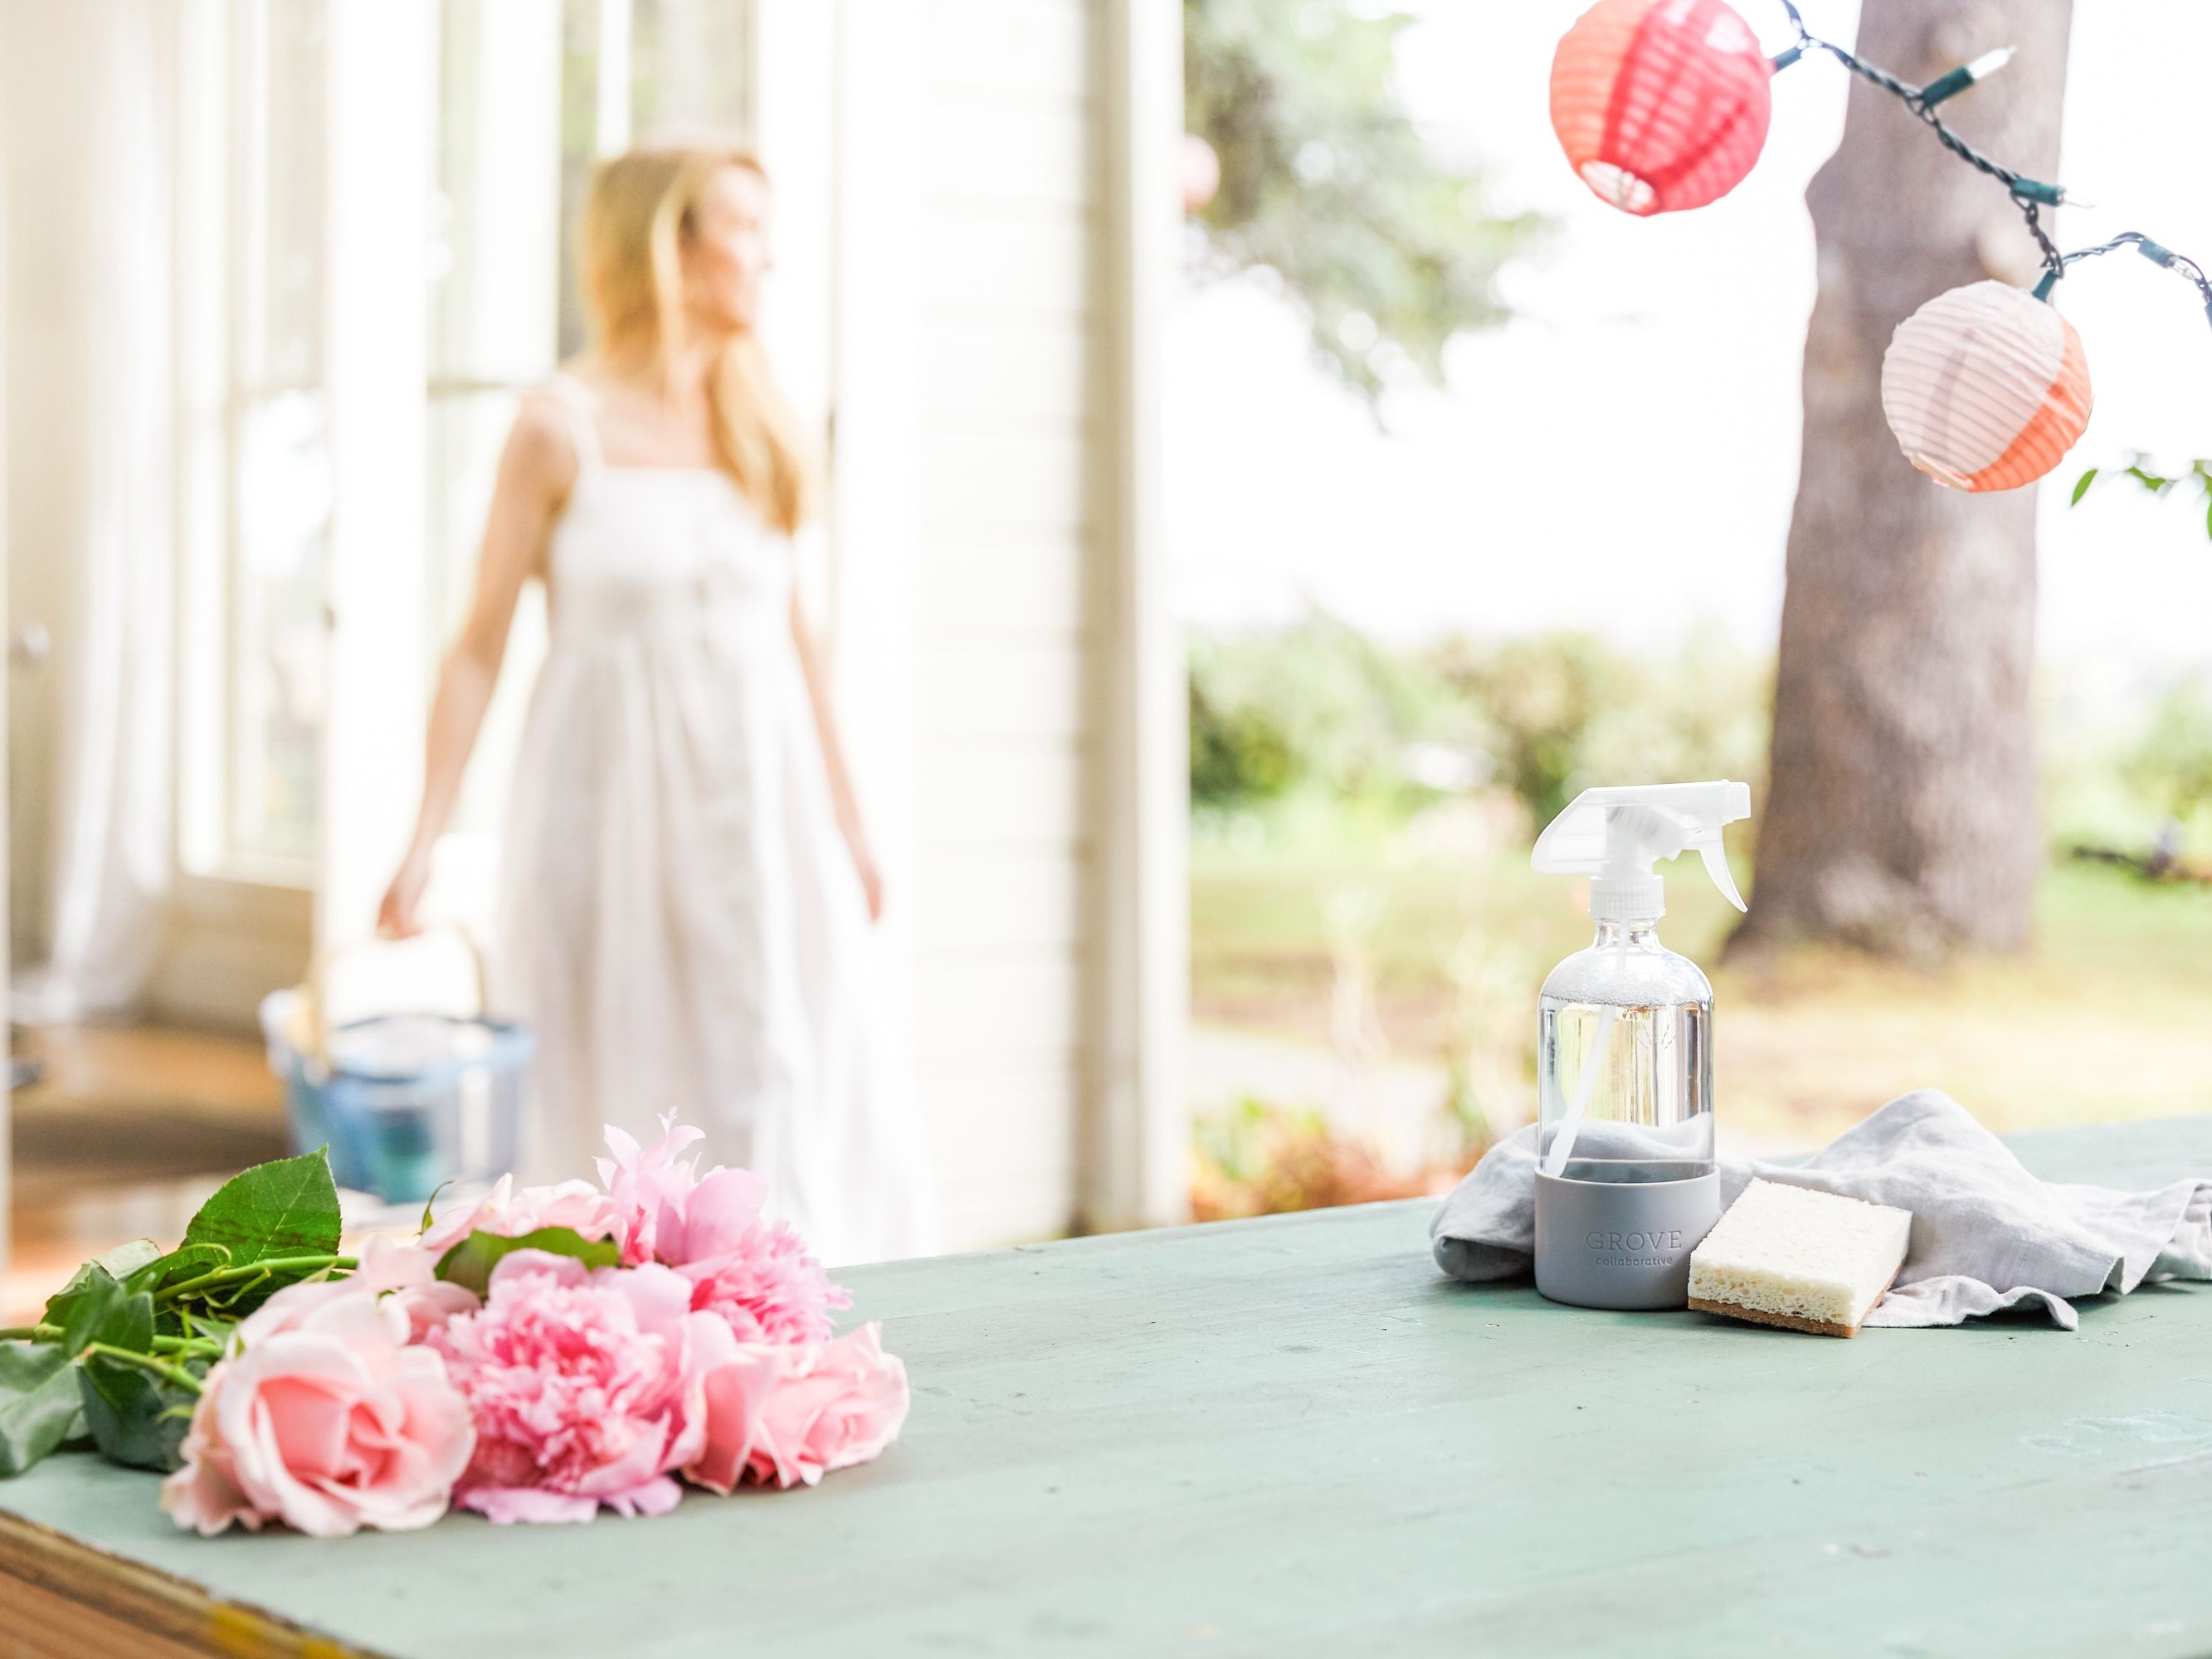 Woman in white dress in background next to open door with table and roses and string lights in foreground